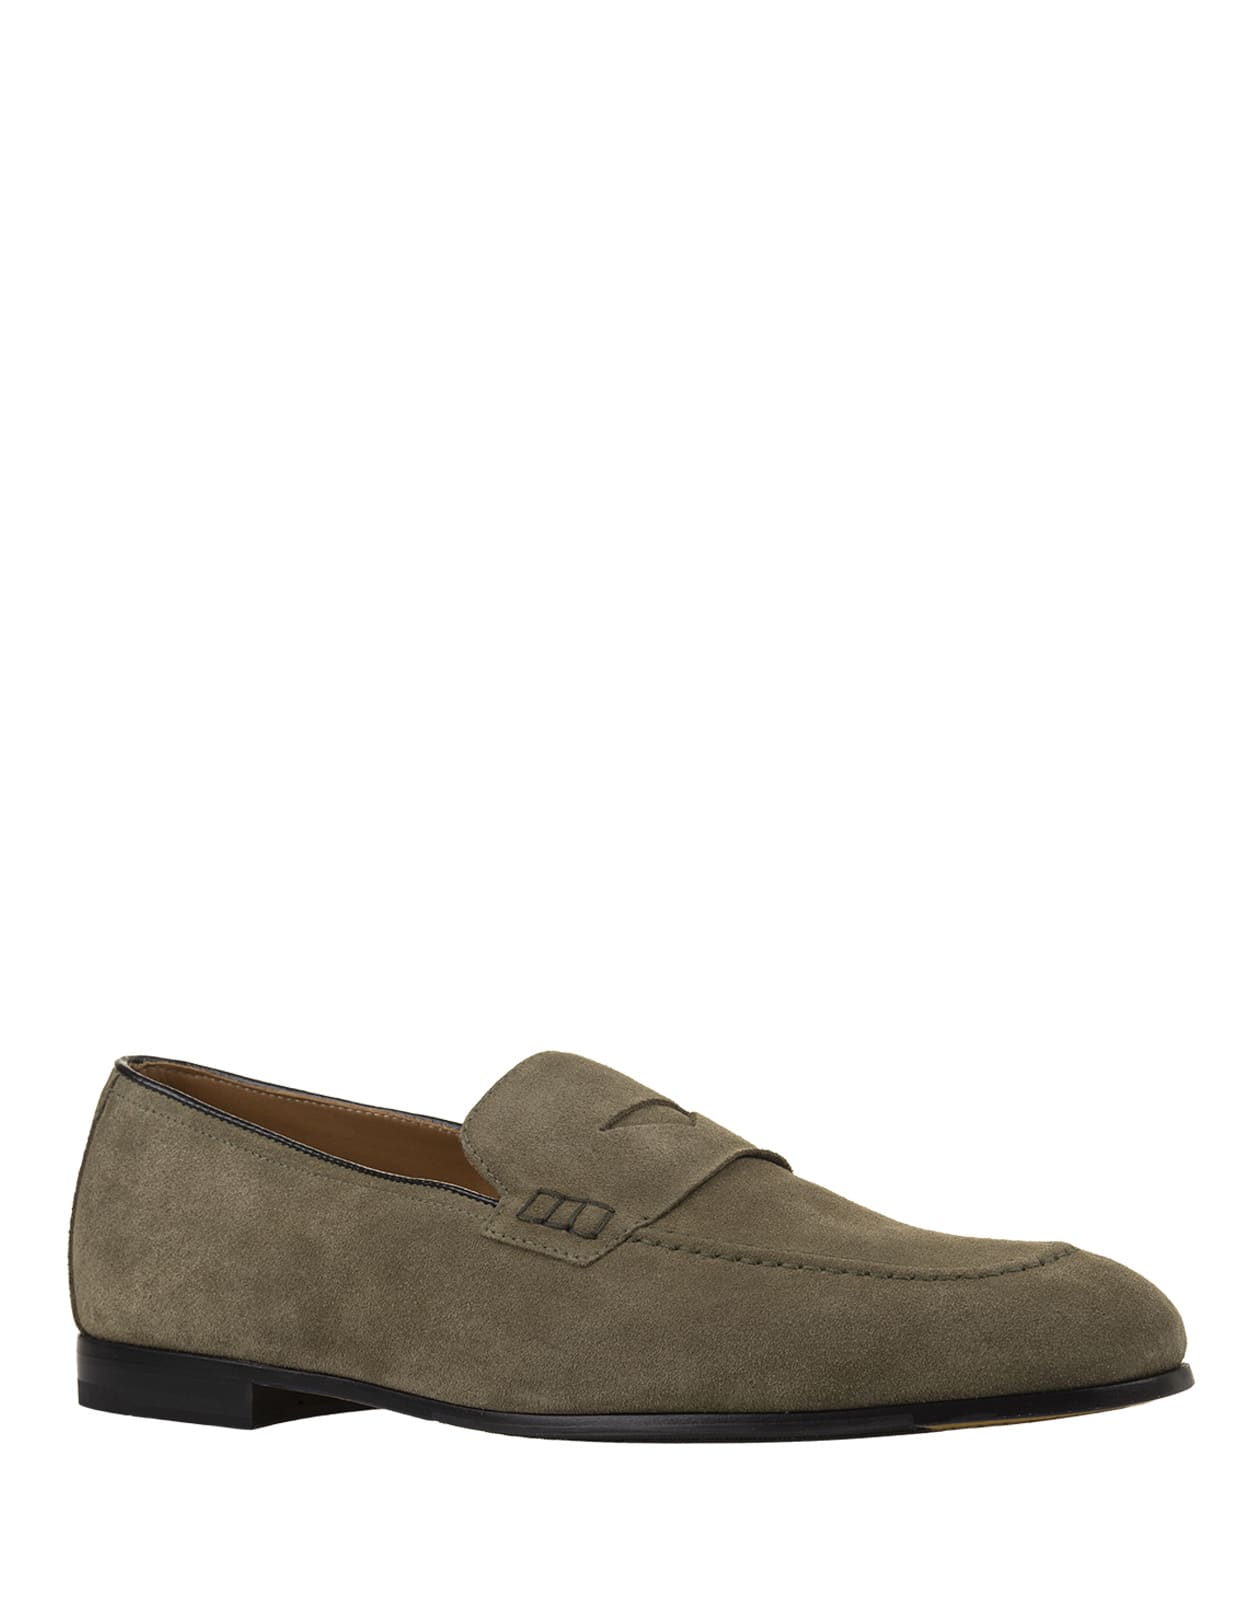 Green Suede Penny Loafers